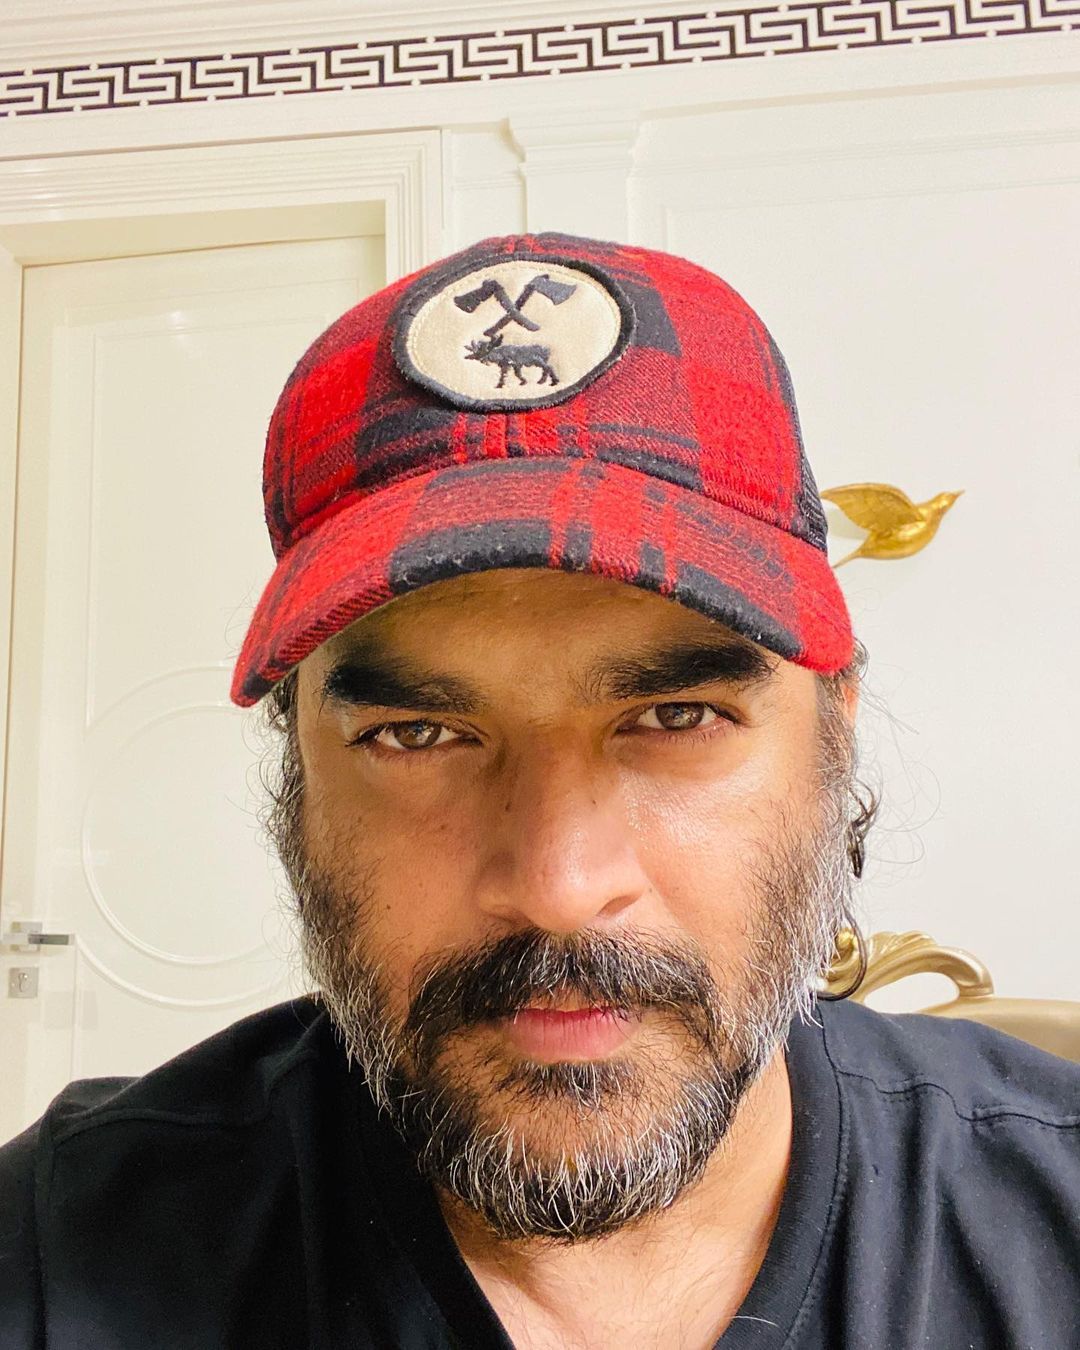 Troll Says Madhavan 'Ruining Career, Health With Alcohol And Drugs', He Reacts: May Be You Need A Docs Appointment